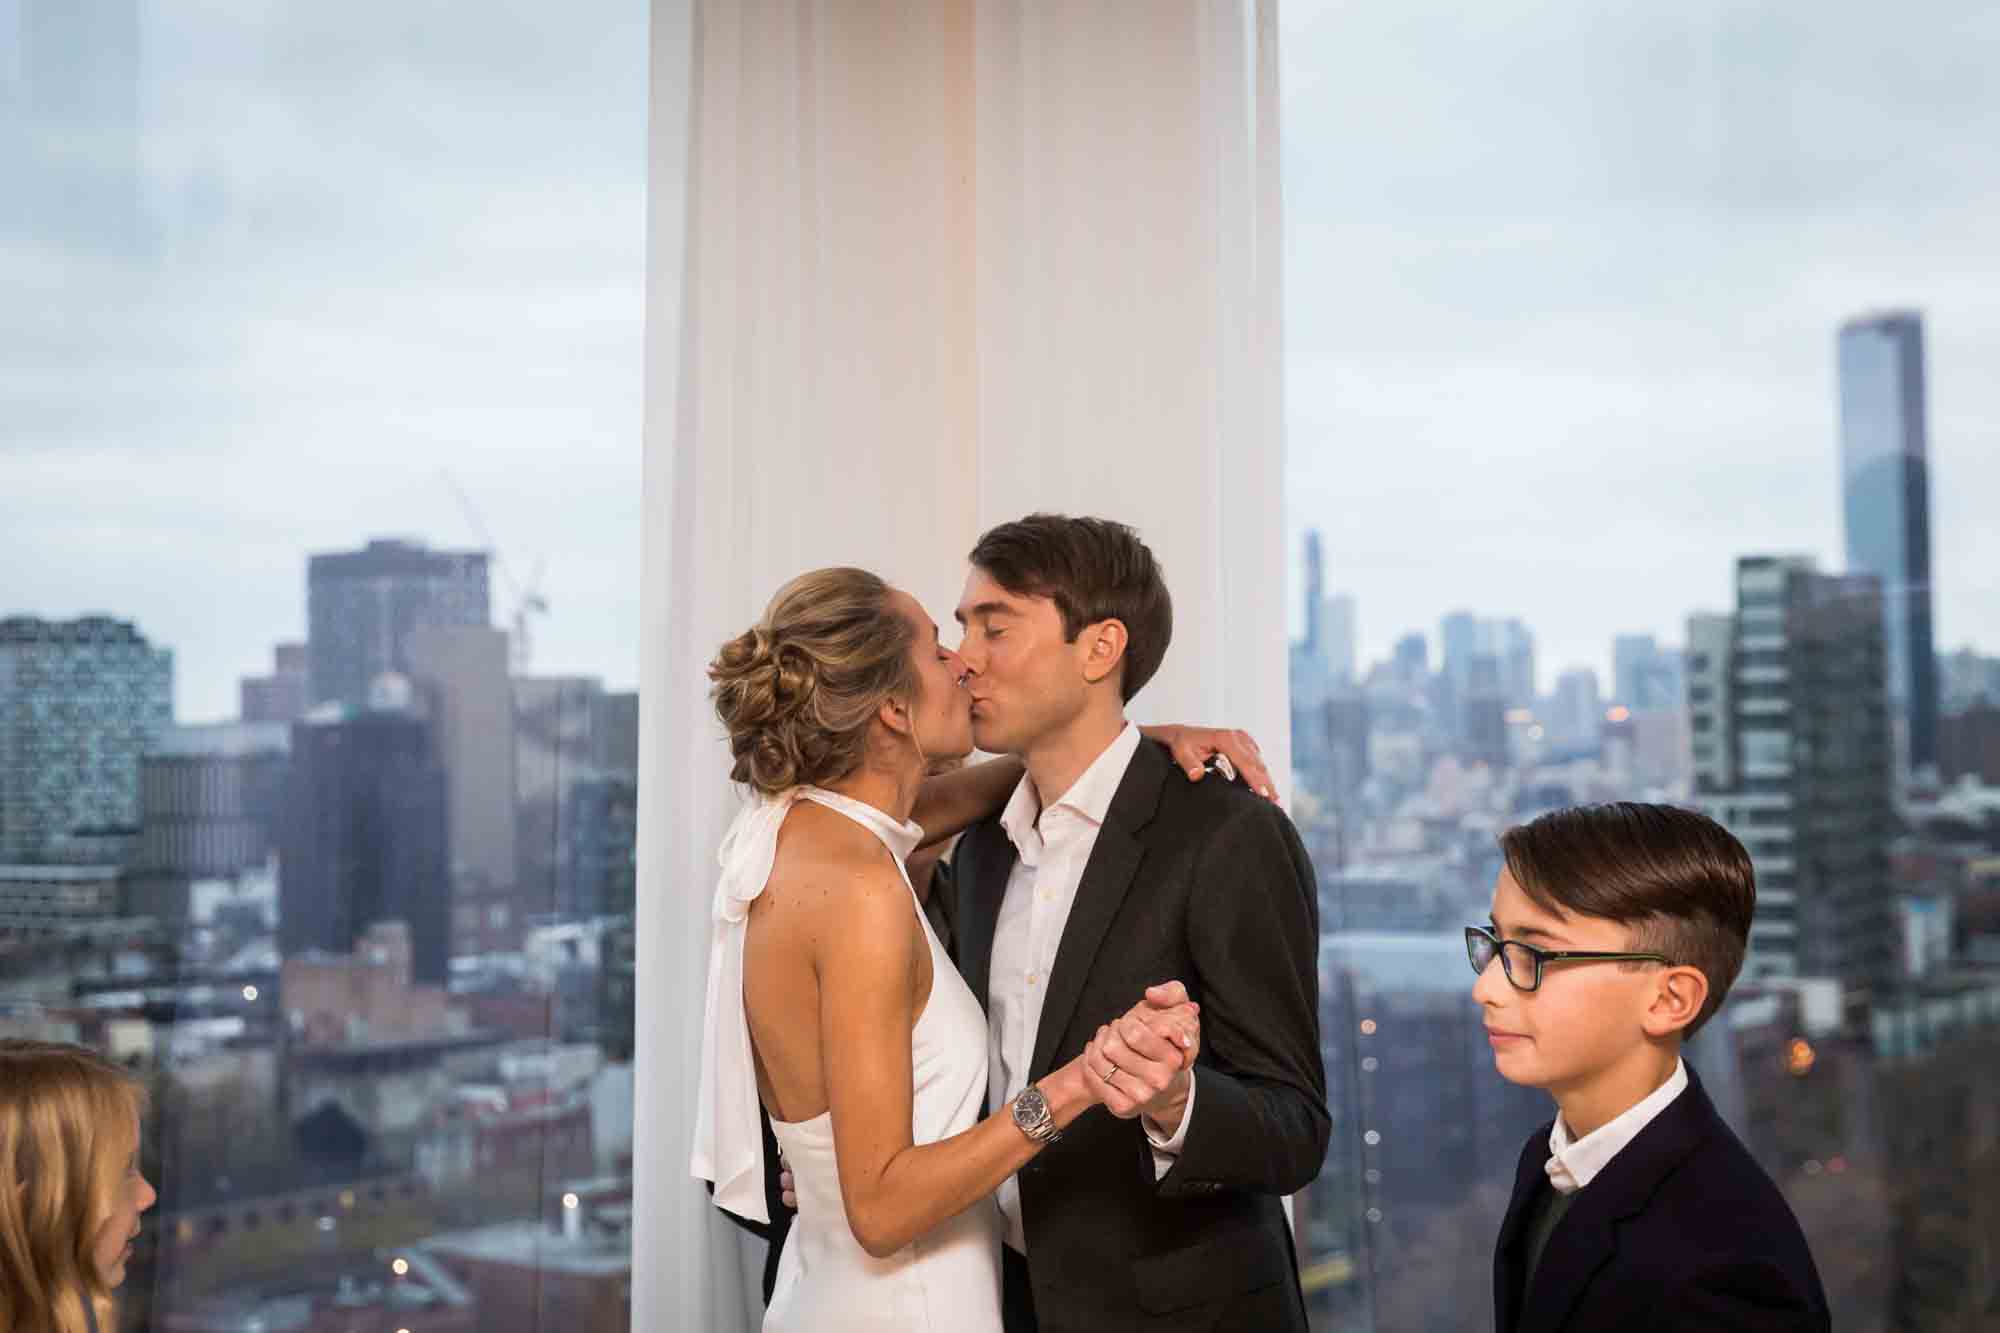 Bride and groom kissing after ceremony at a Public Hotel wedding